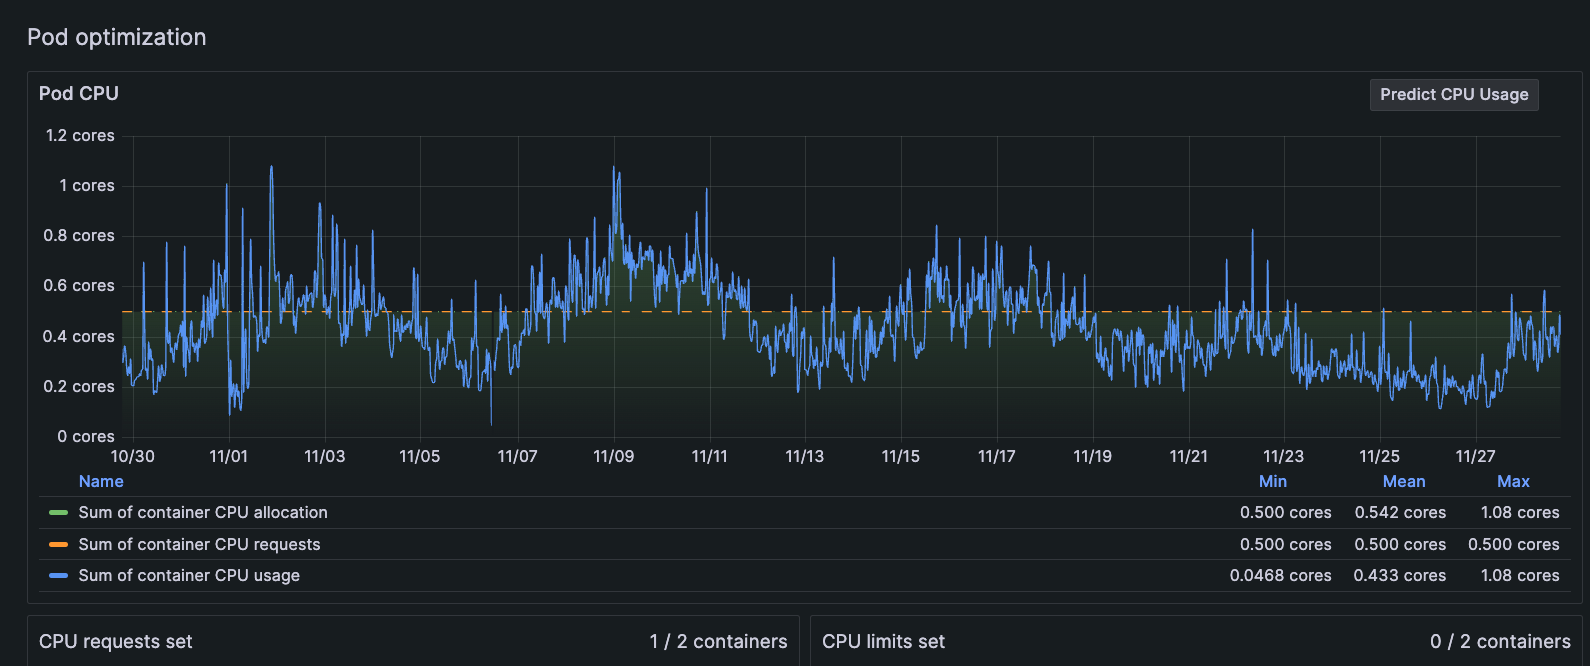 Graph of Pod CPU usage bursting above the line for CPU limits for 30-day period